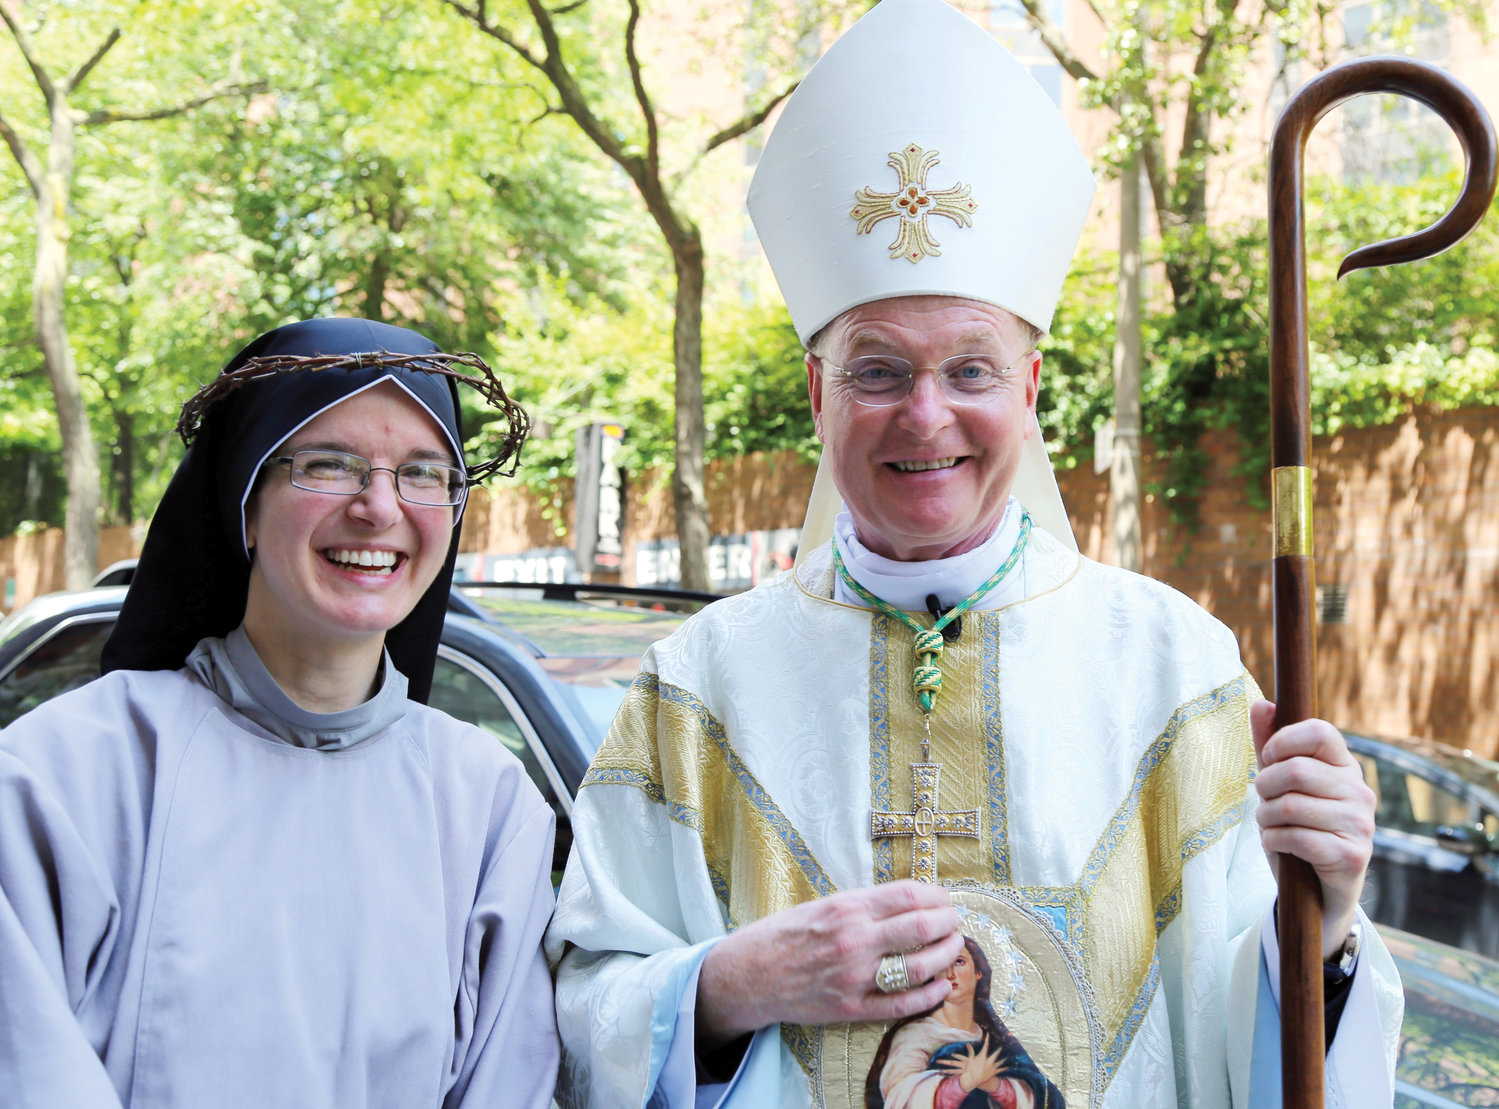 Sister Josephine Marie of Mercy, C.F.R., received the final vows at Our Lady of Good Counsel Church in Manhattan, where Auxiliary Bishop Edmund Whalen celebrated the June 4 Mass.